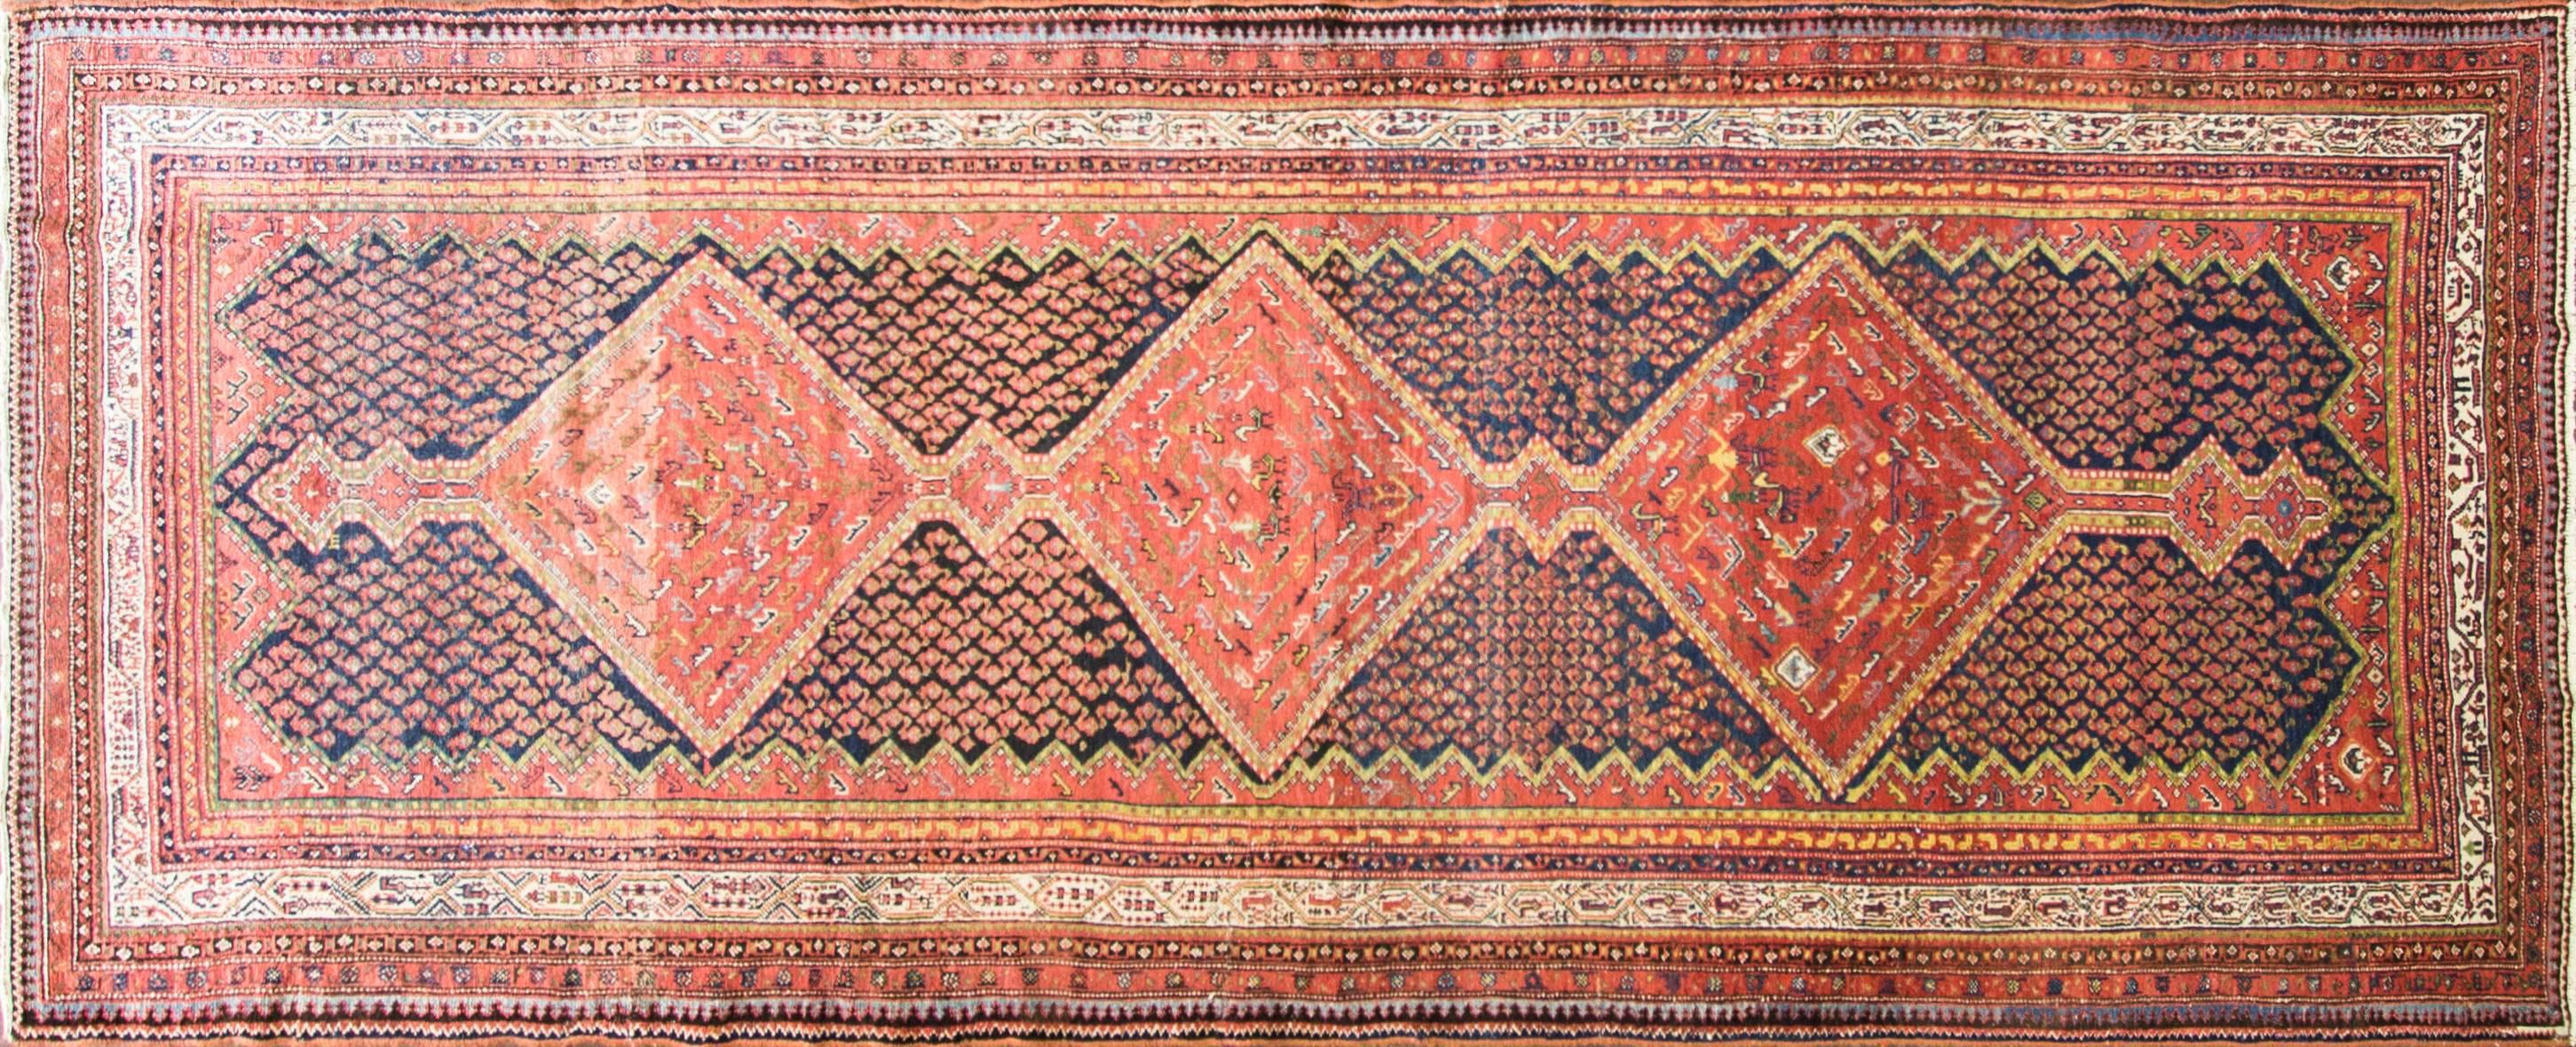 A very busy Herati center and a pleasant border design with running water and trees people and animals. The tribal weavers in Malayer were often Turkish, and they employed the Turkish knot, Gourde, to weave these creations. The Gourde is a